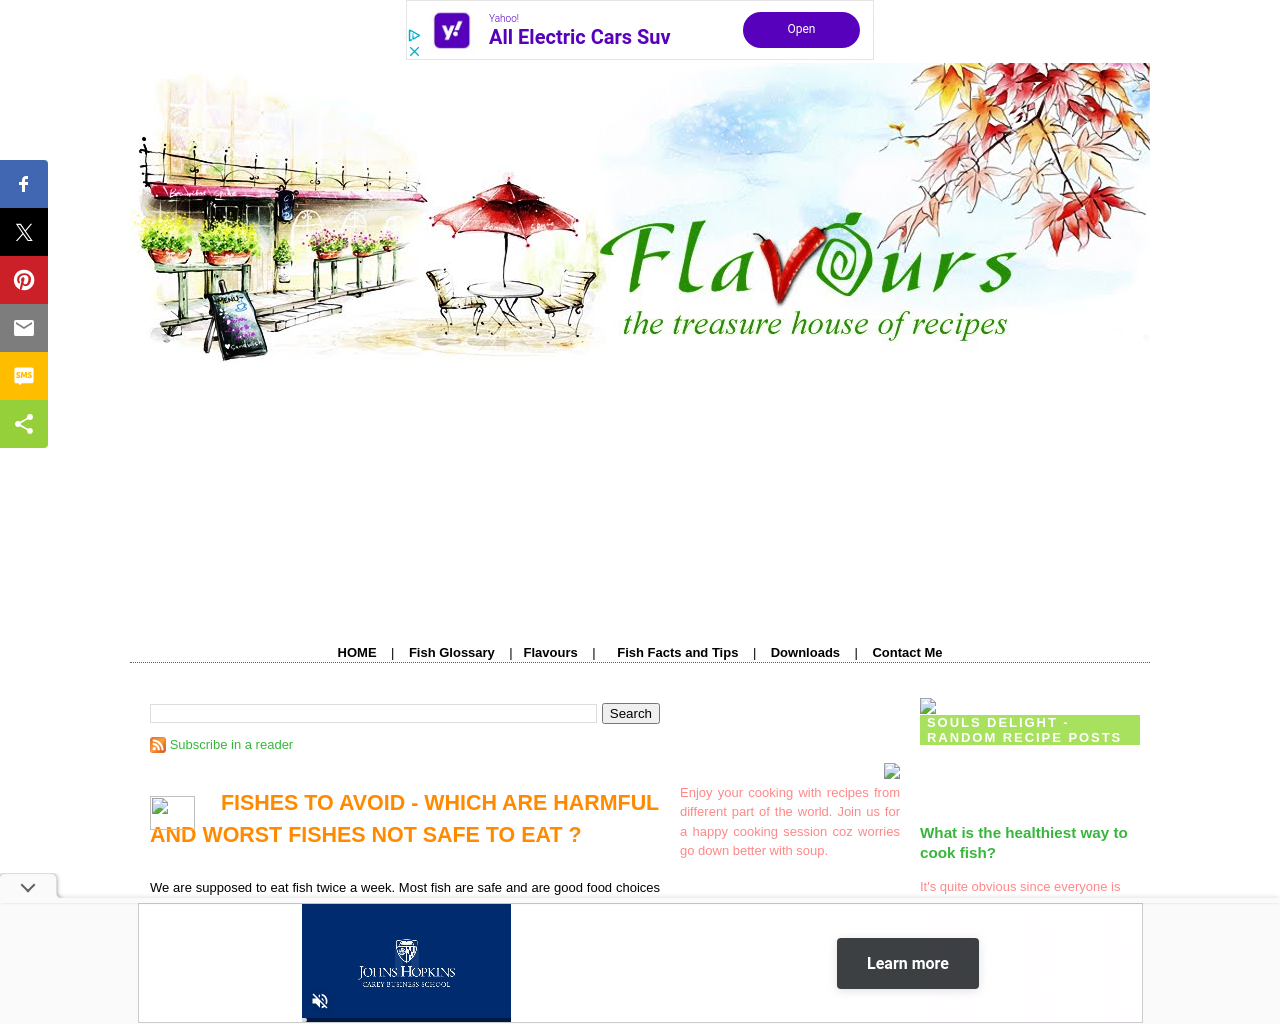 Flavours - The treasure house of recipes